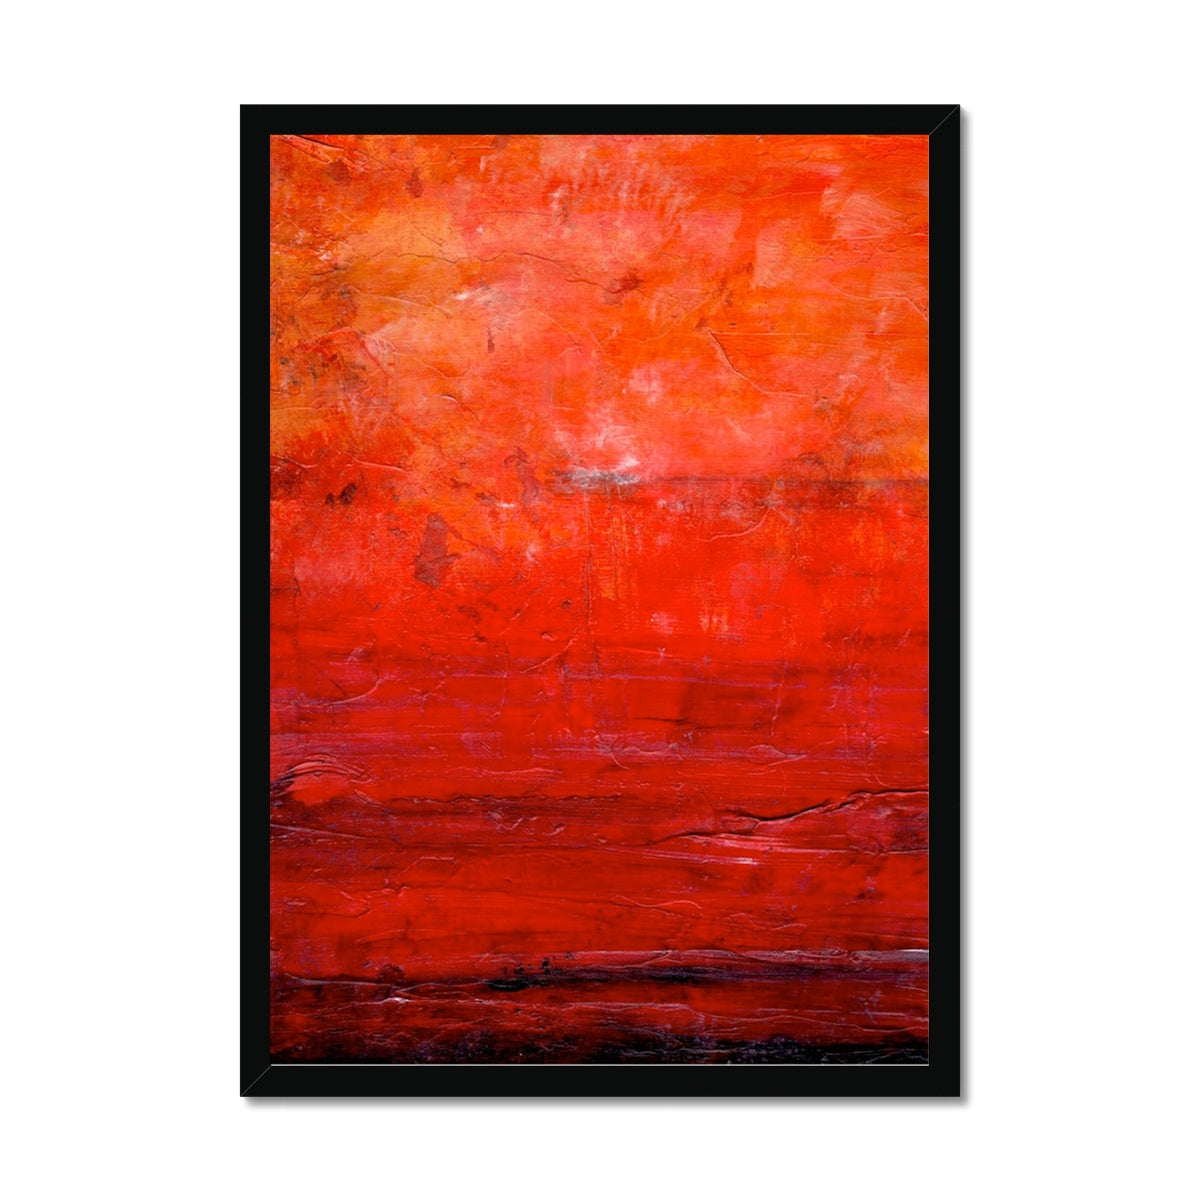 Abstract Summer Painting | Framed Prints From Scotland-Framed Prints-Abstract & Impressionistic Art Gallery-A2 Portrait-Black Frame-Paintings, Prints, Homeware, Art Gifts From Scotland By Scottish Artist Kevin Hunter